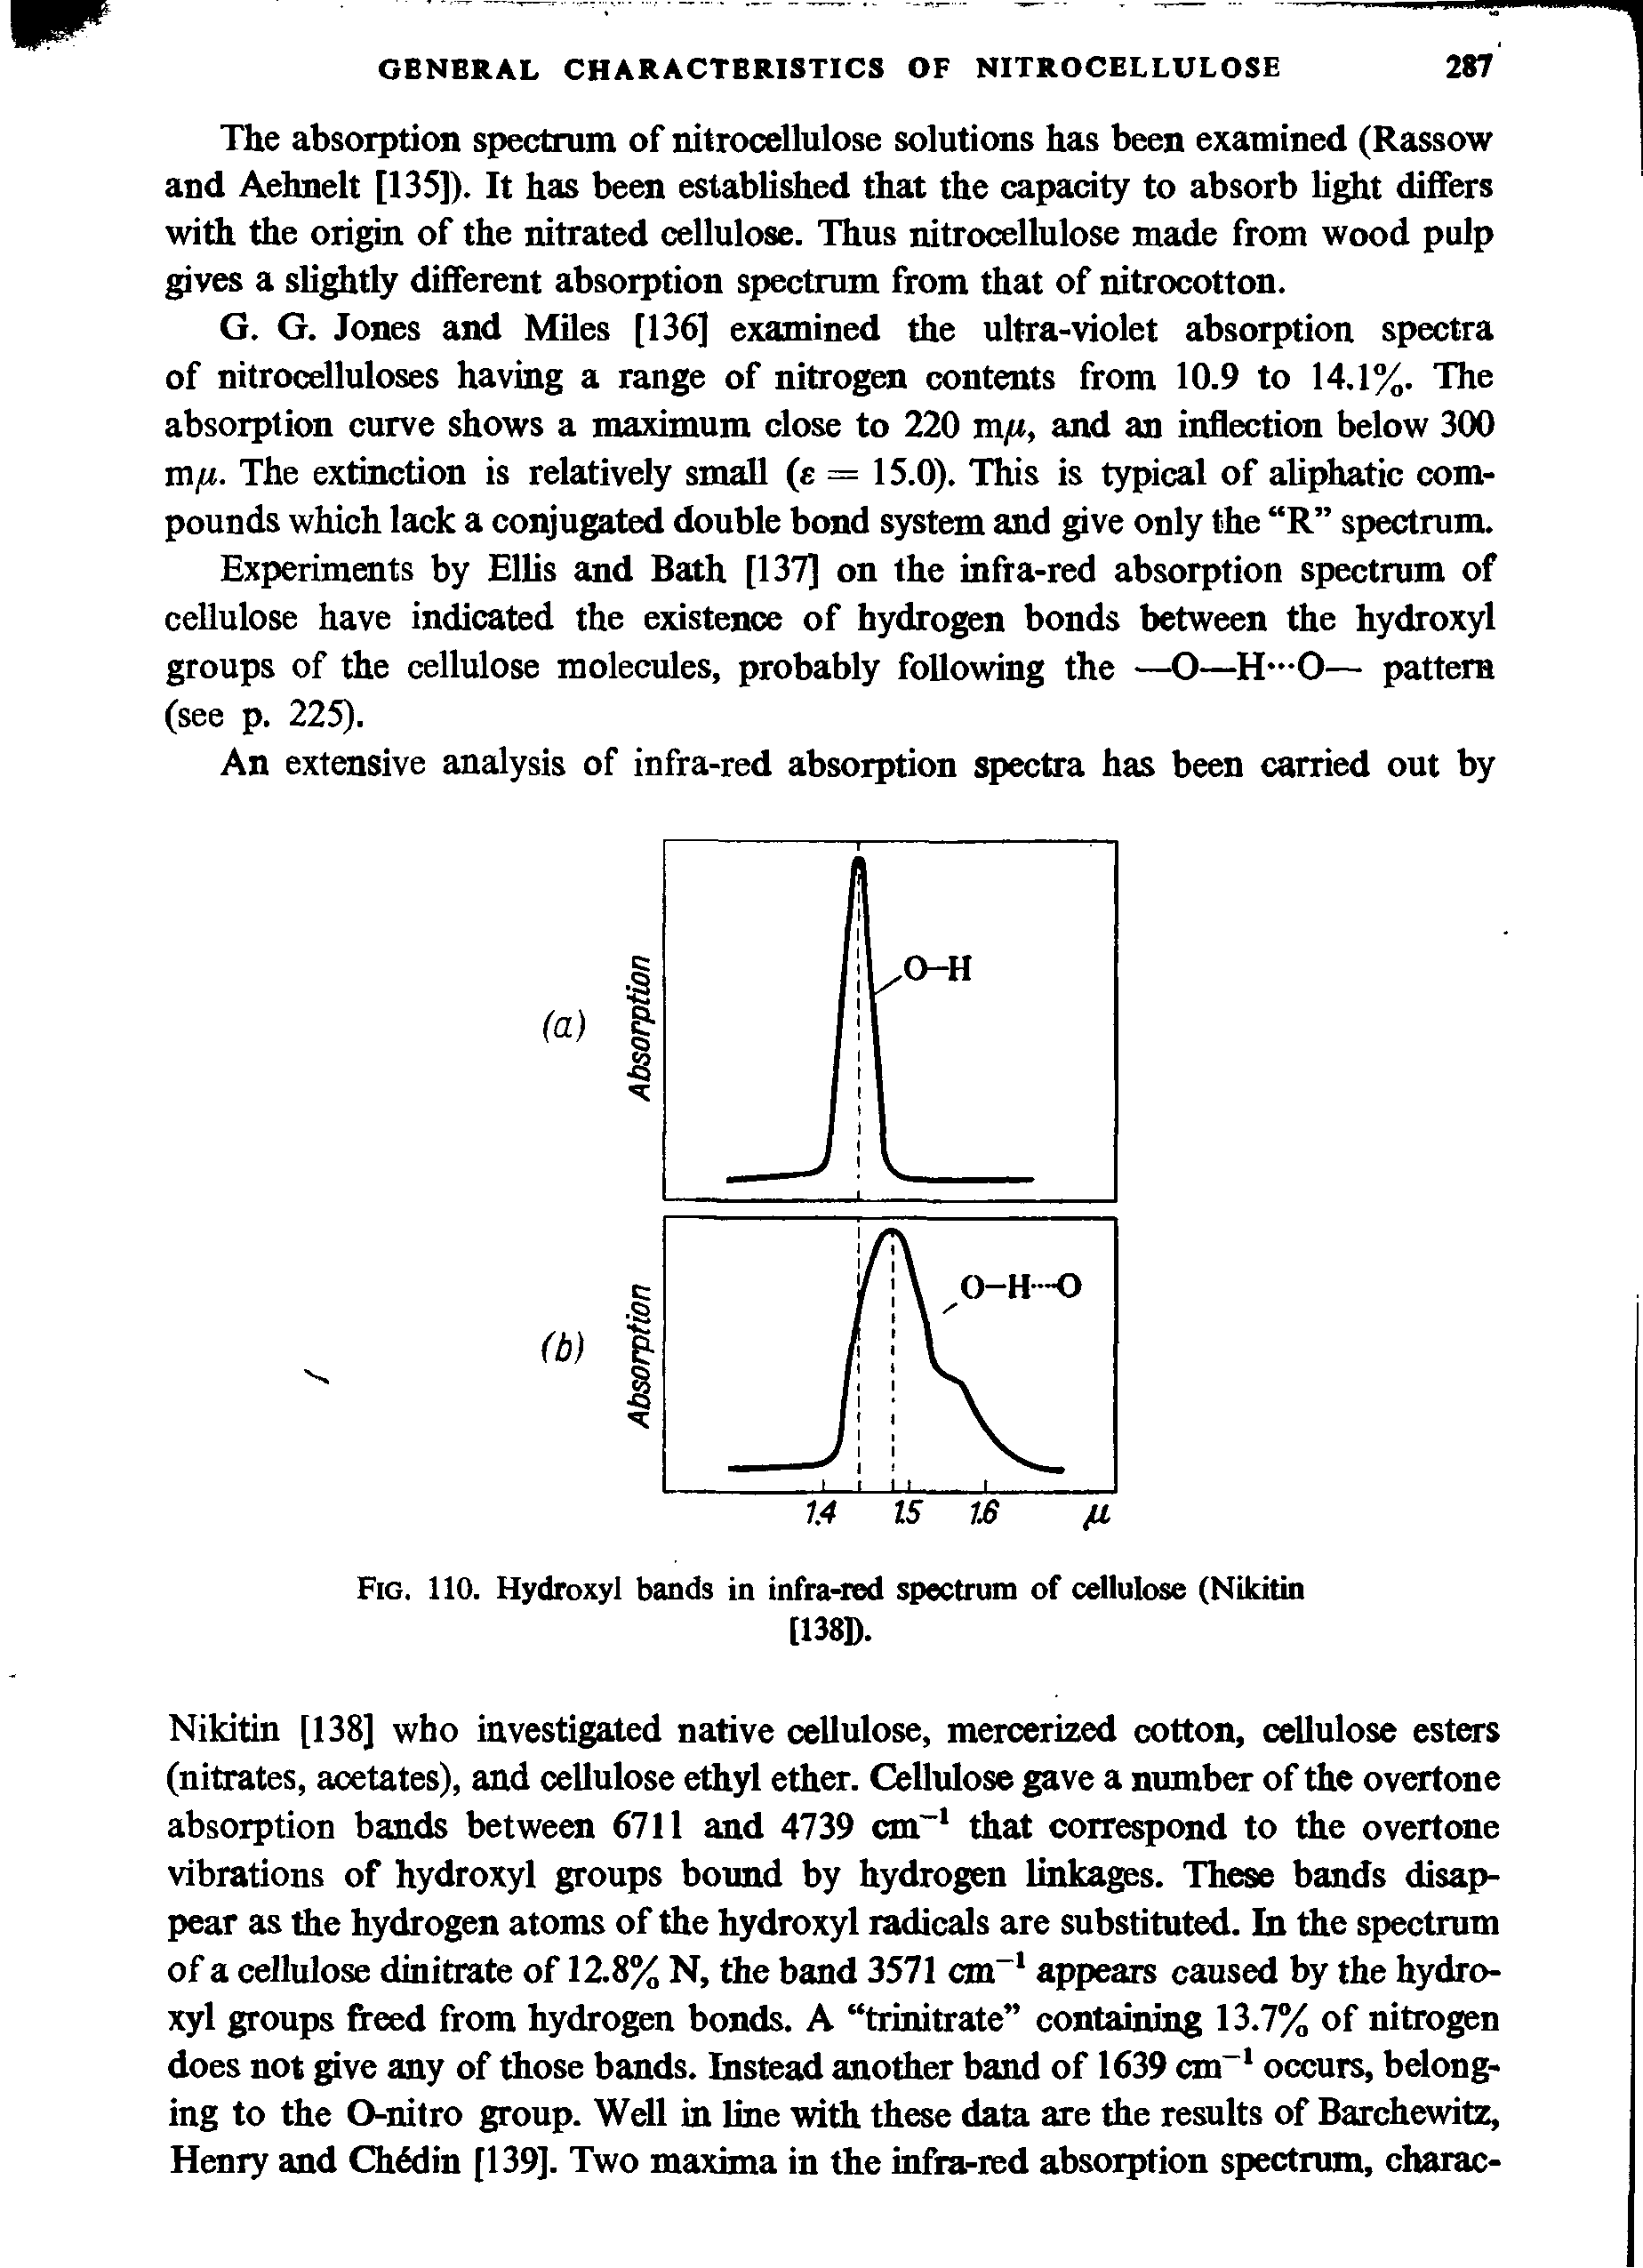 Fig. 110. Hydroxyl bands in infra-red spectrum of cellulose (Nikitin...